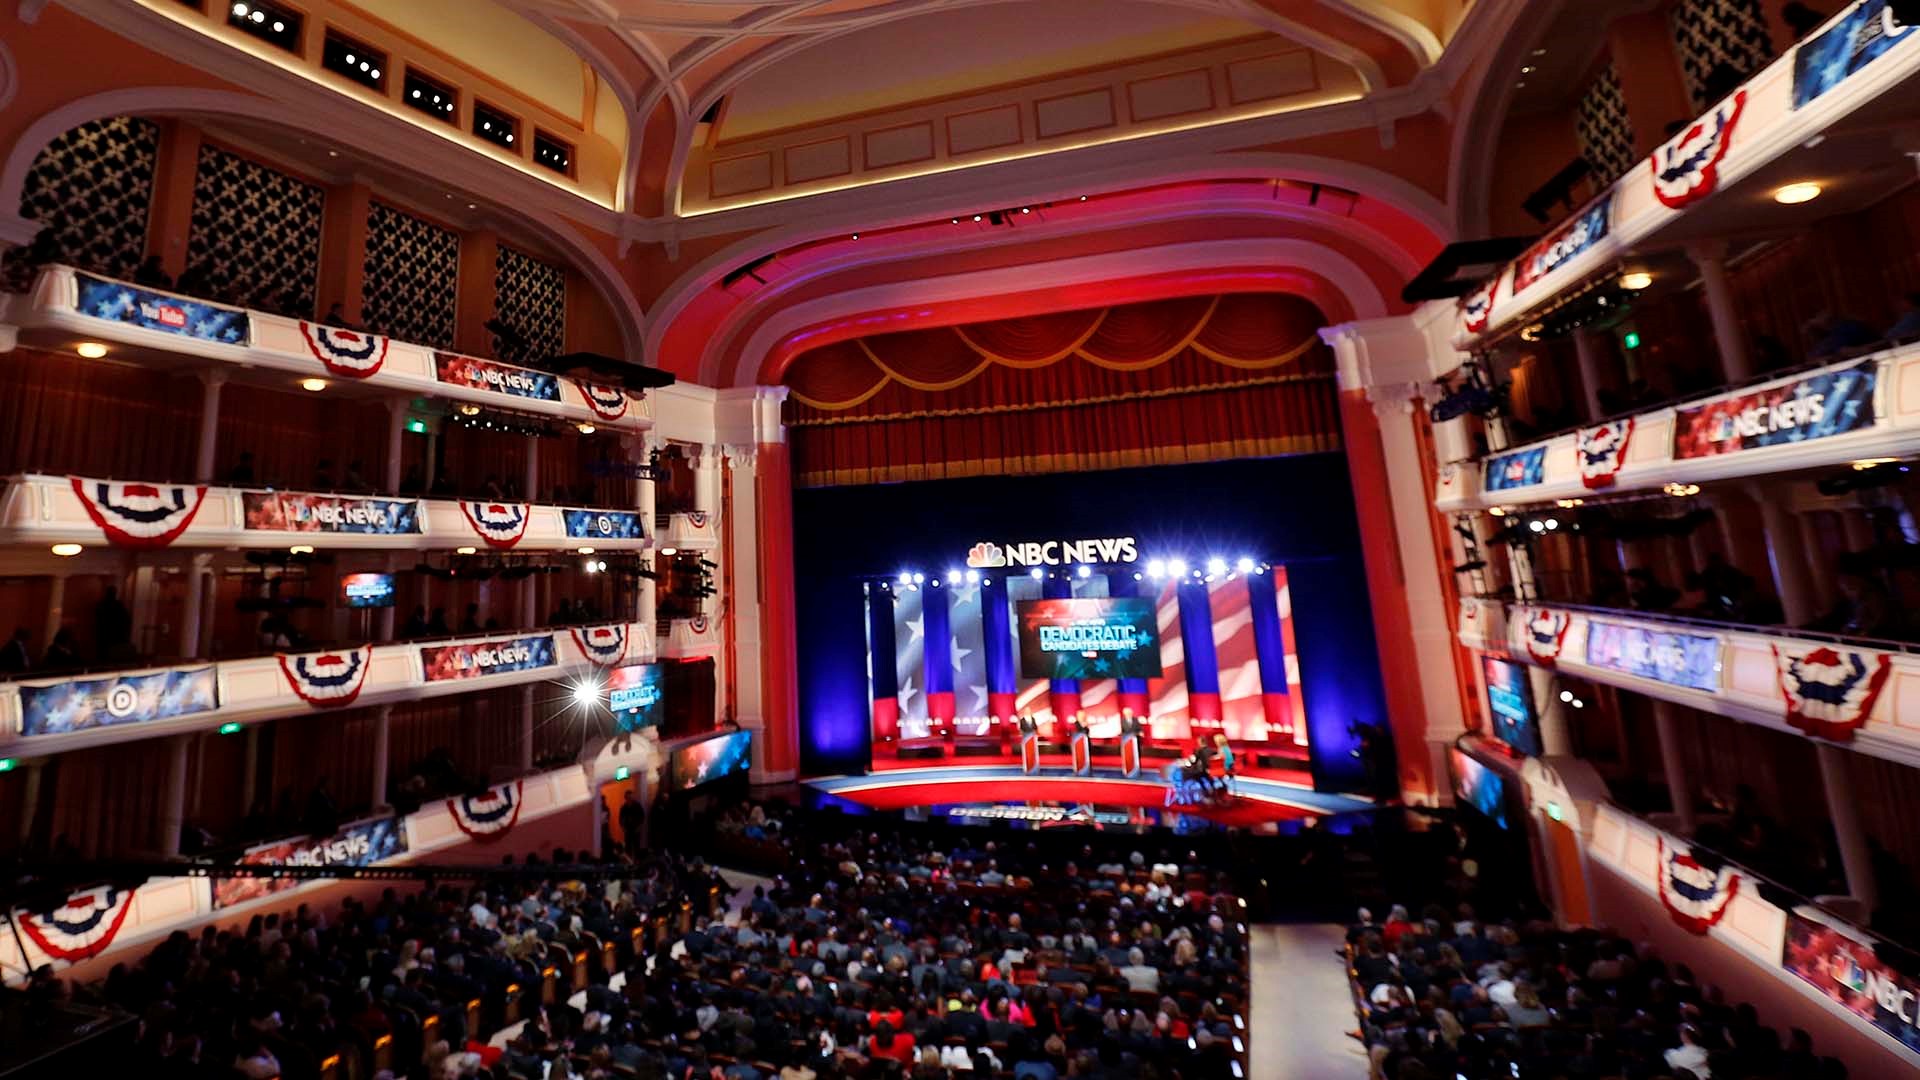 With a field of 20 or more expected Democratic candidates, each of the first two debates will be broken up into two nights so they can be heard.